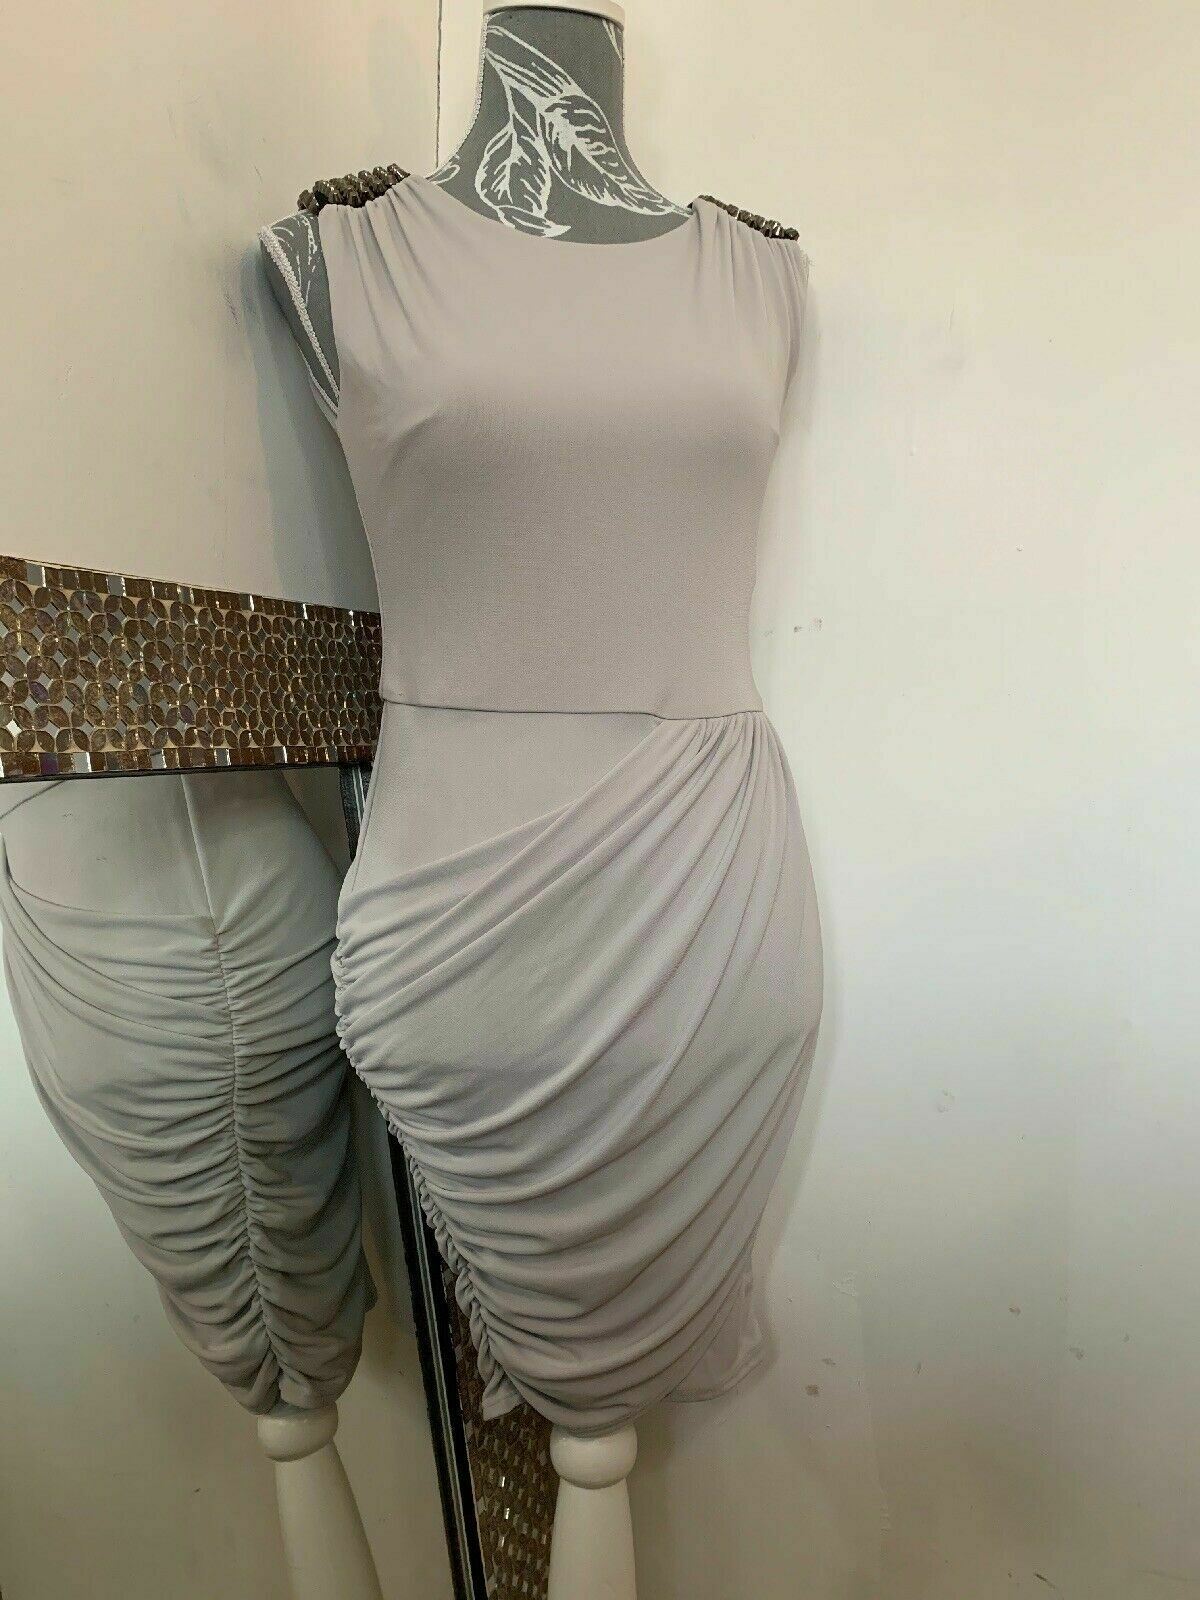 River Island Futuristic fitted Goddess dress studded shoulders BNWT Size 6